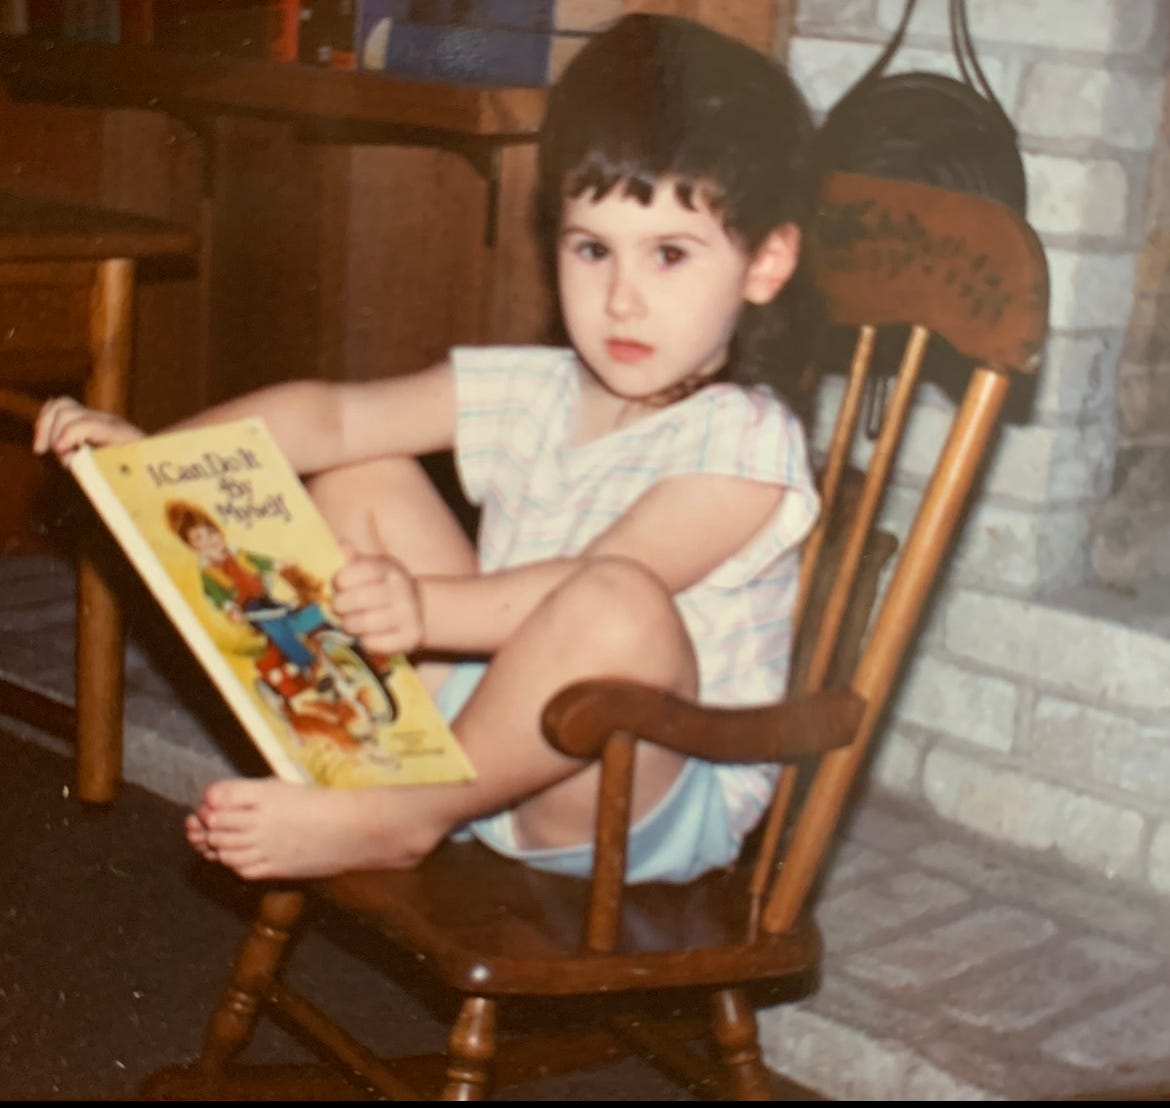 Little Lyric, sitting legs crossed, feet up in a rocking chair, reading the book “I can do it by myself” - it appears the camera caught them off-guard. 